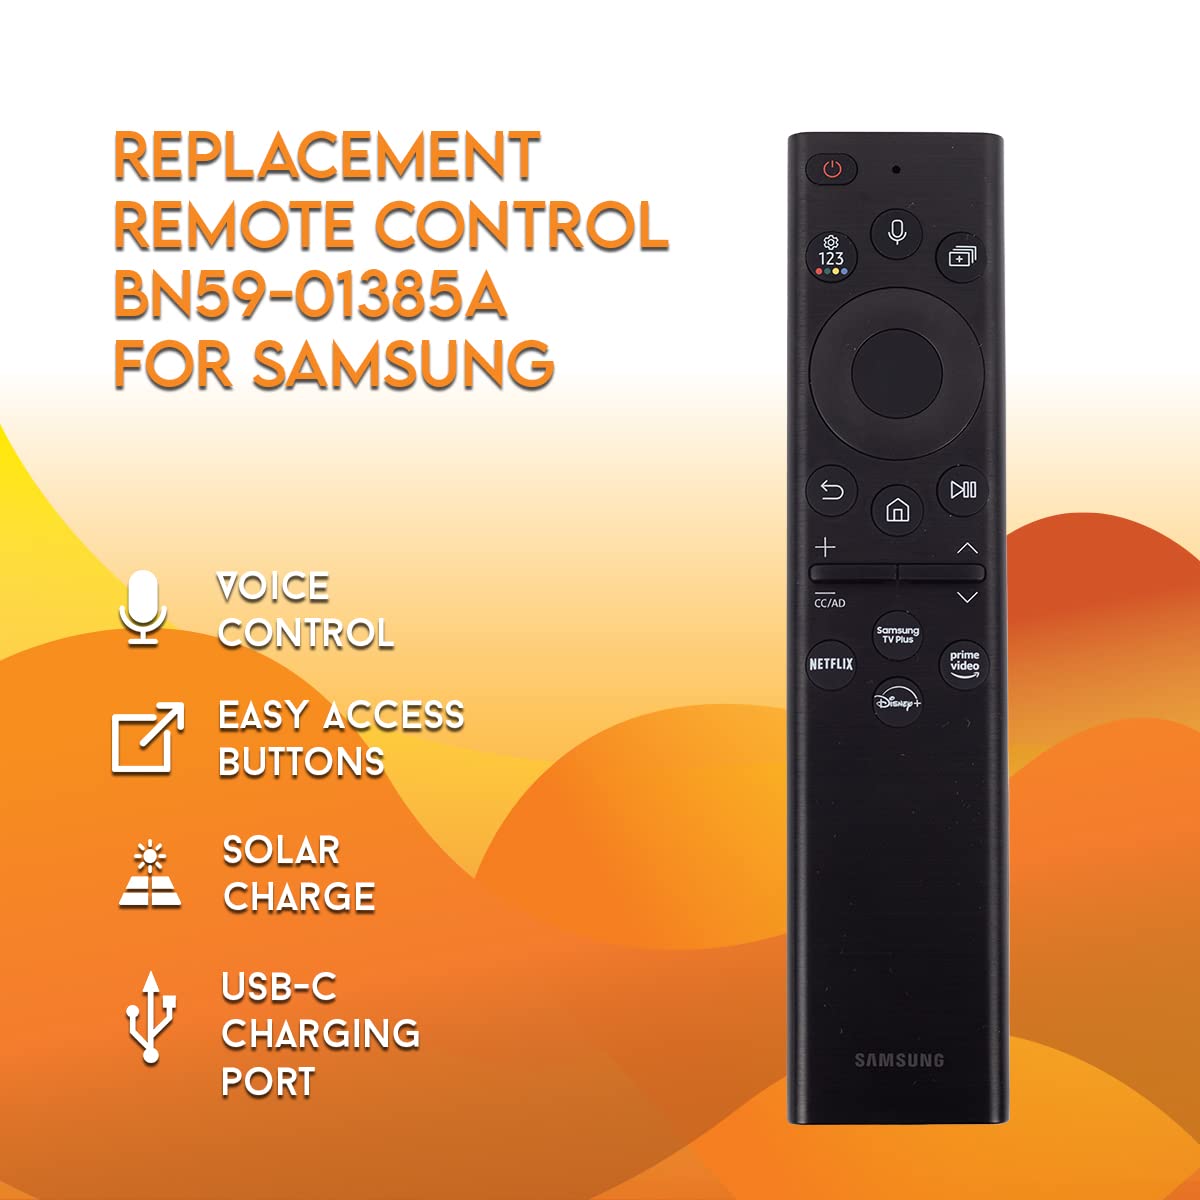 Mua 2021 Model Bn59 01385a Replacement Remote Control For Samsung Smart Tvs Compatible With Neo 3758